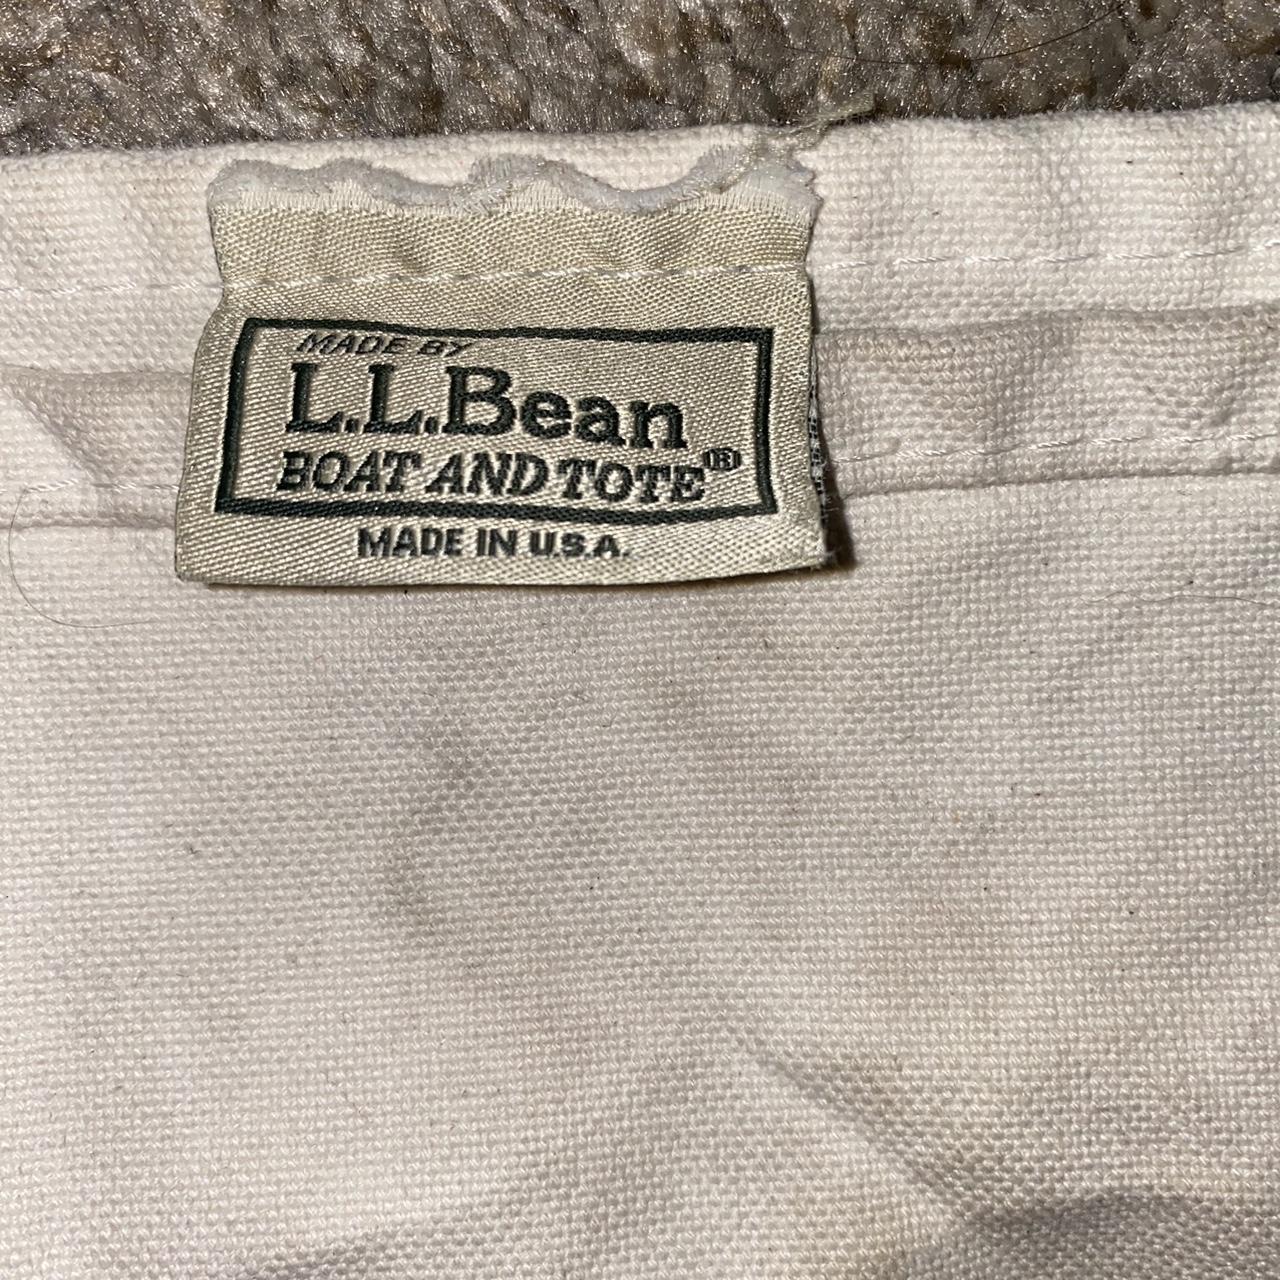 Vintage LL Bean Bote and Tote Bag Small, few - Depop